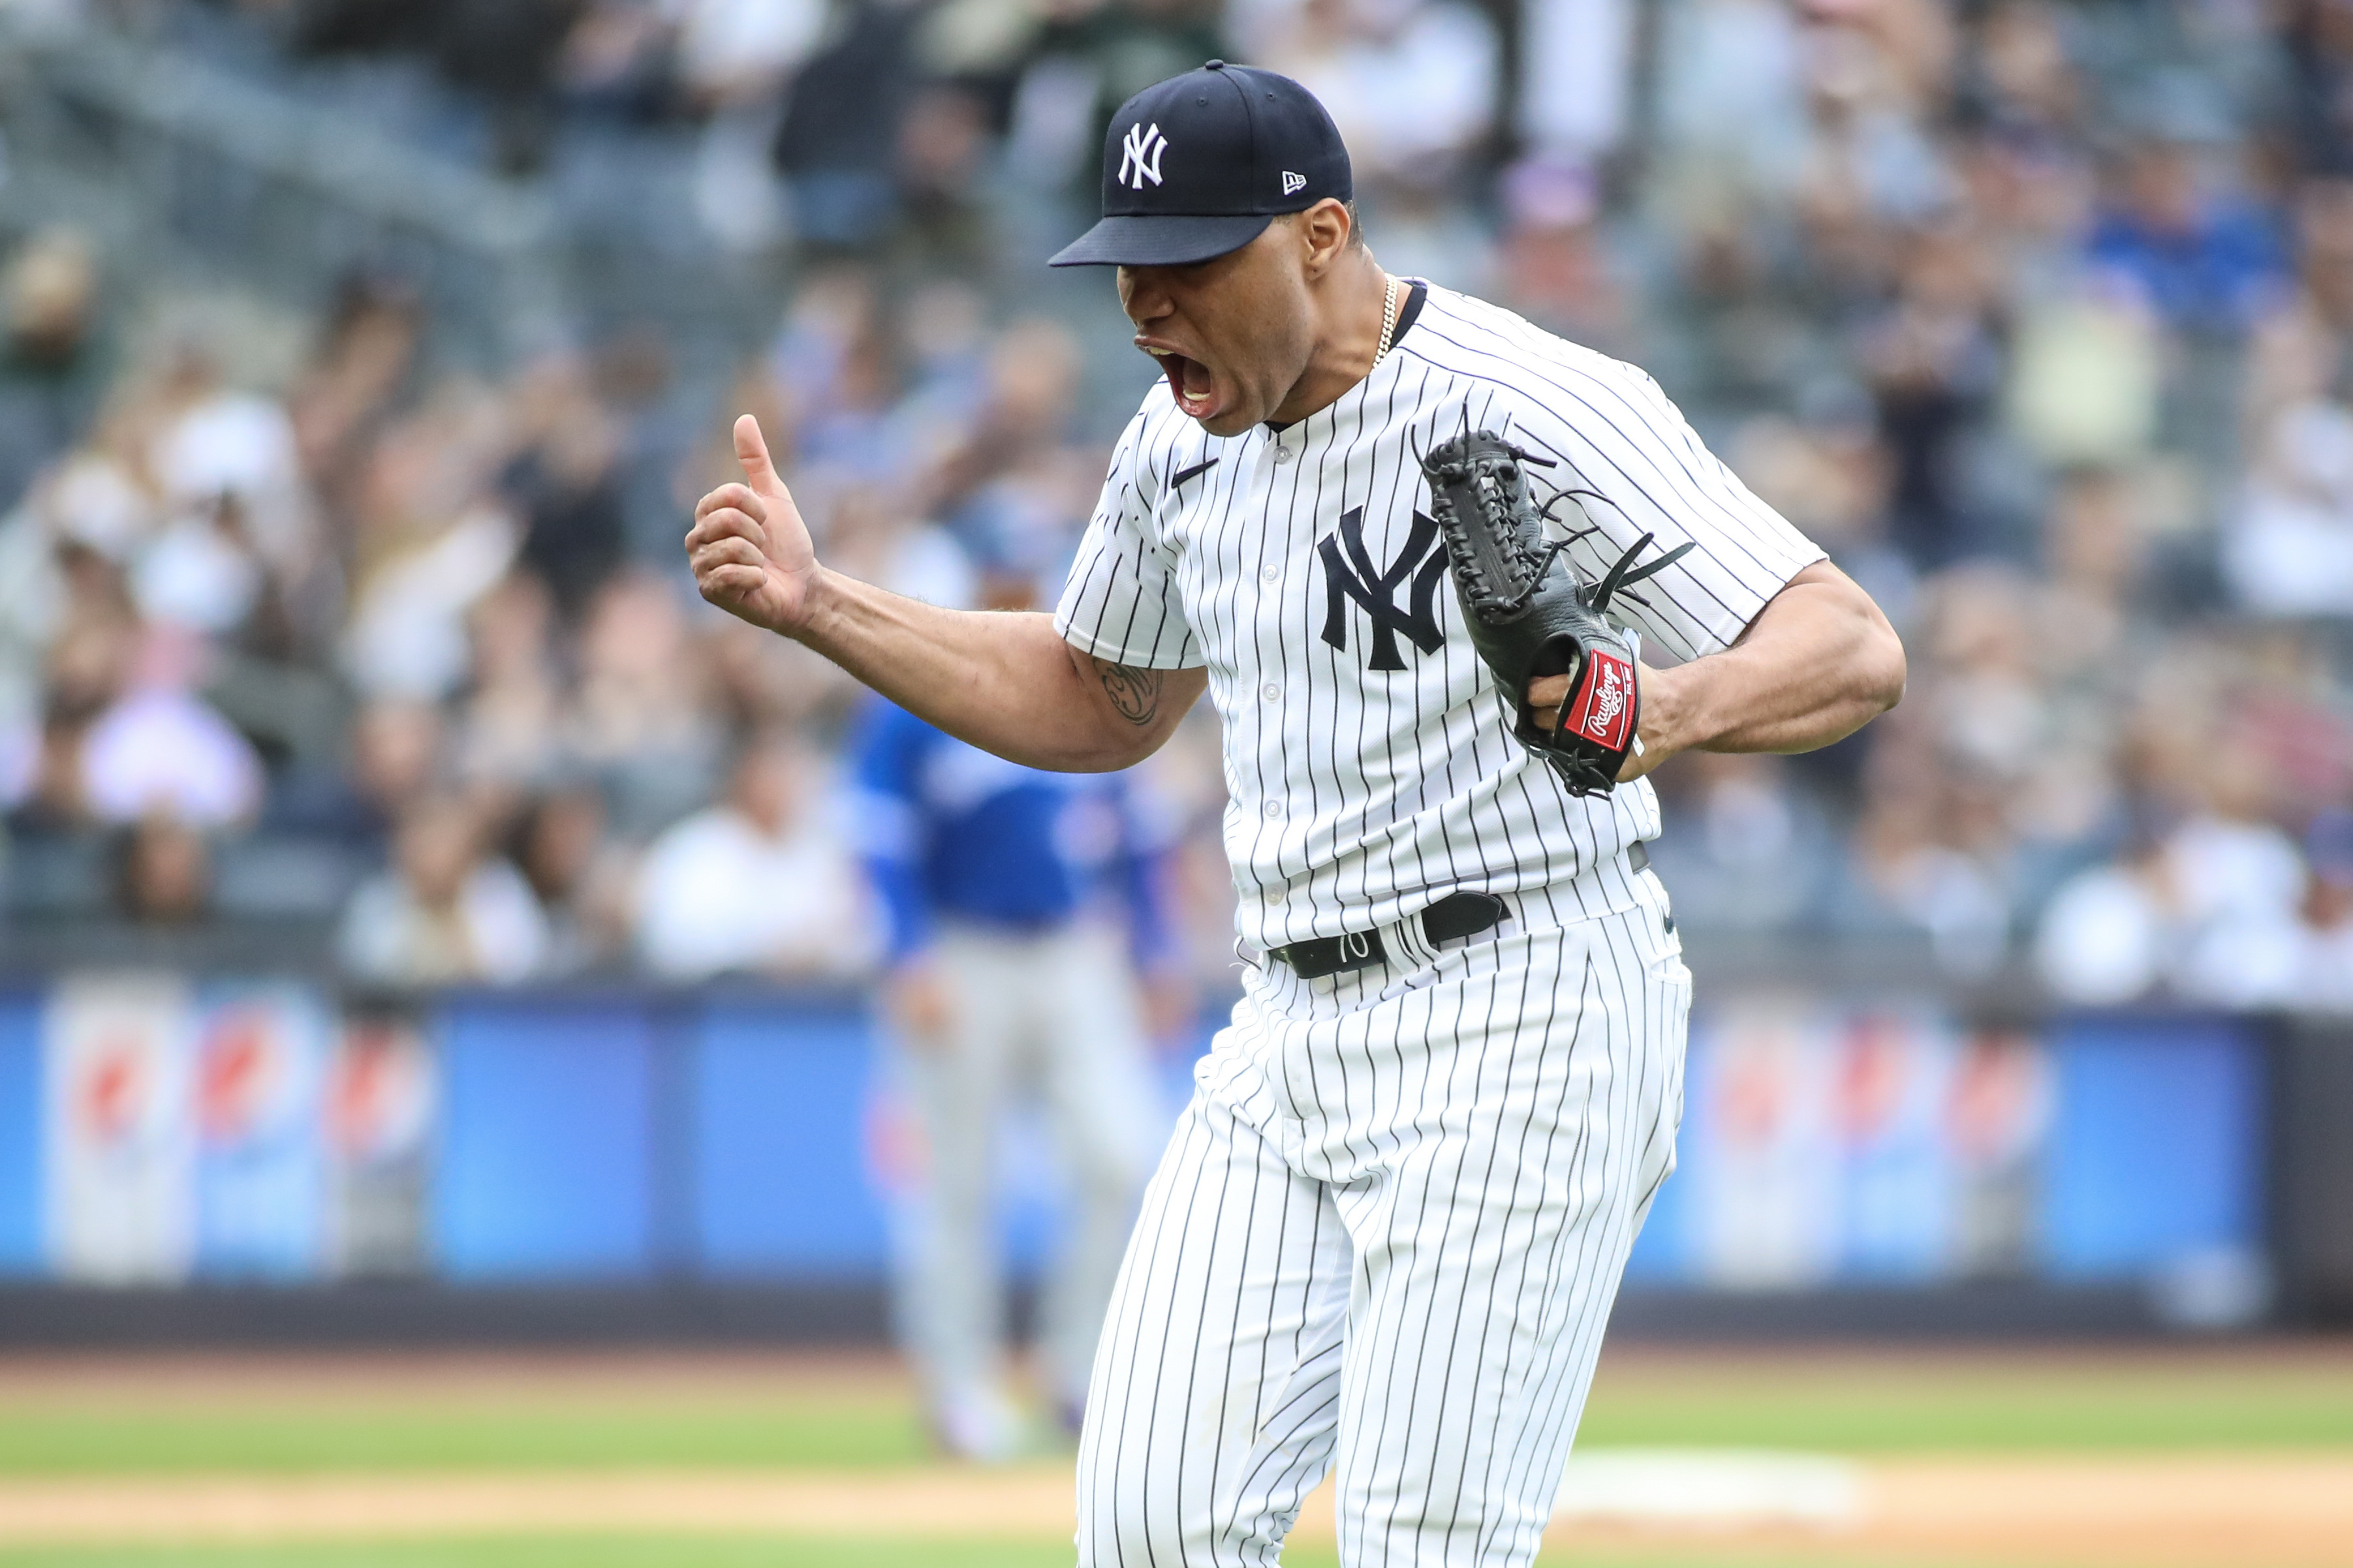 Yankees win on DJ LeMahieu's walk-off hit, securing 3-2 win over Jays -  Pinstripe Alley